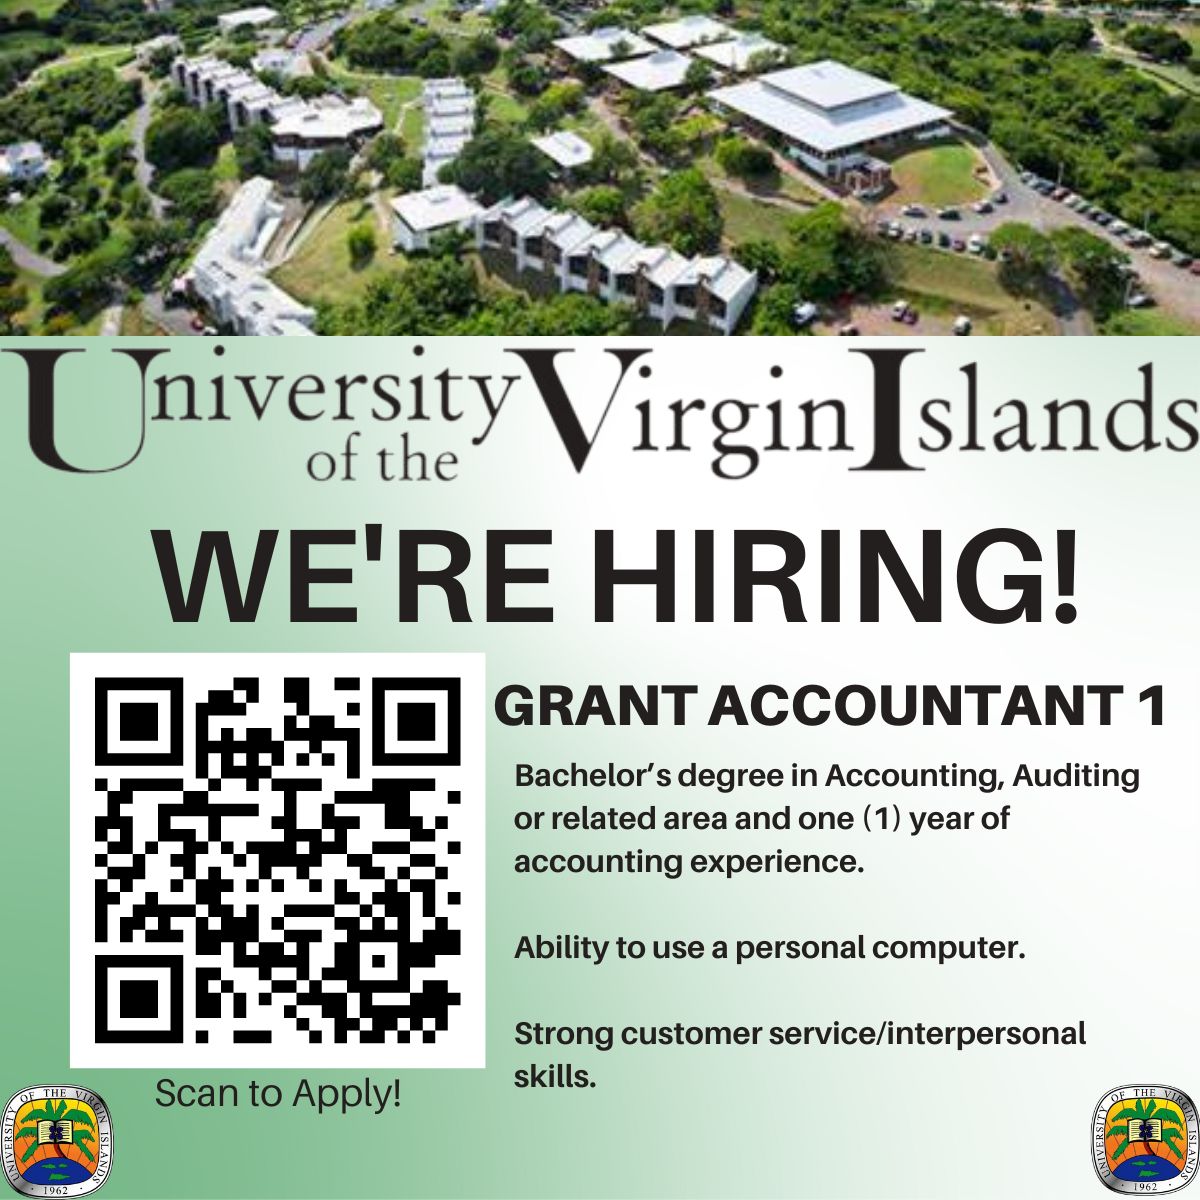 UVI is Hiring -Grant Accountant 1! The selected candidate will administer assigned grant awards, supports Principal Investigators & researchers, & responds to inquiries from internal & external auditors & federal & local agencies concerning grant info. careers.uvi.edu/postings/7114